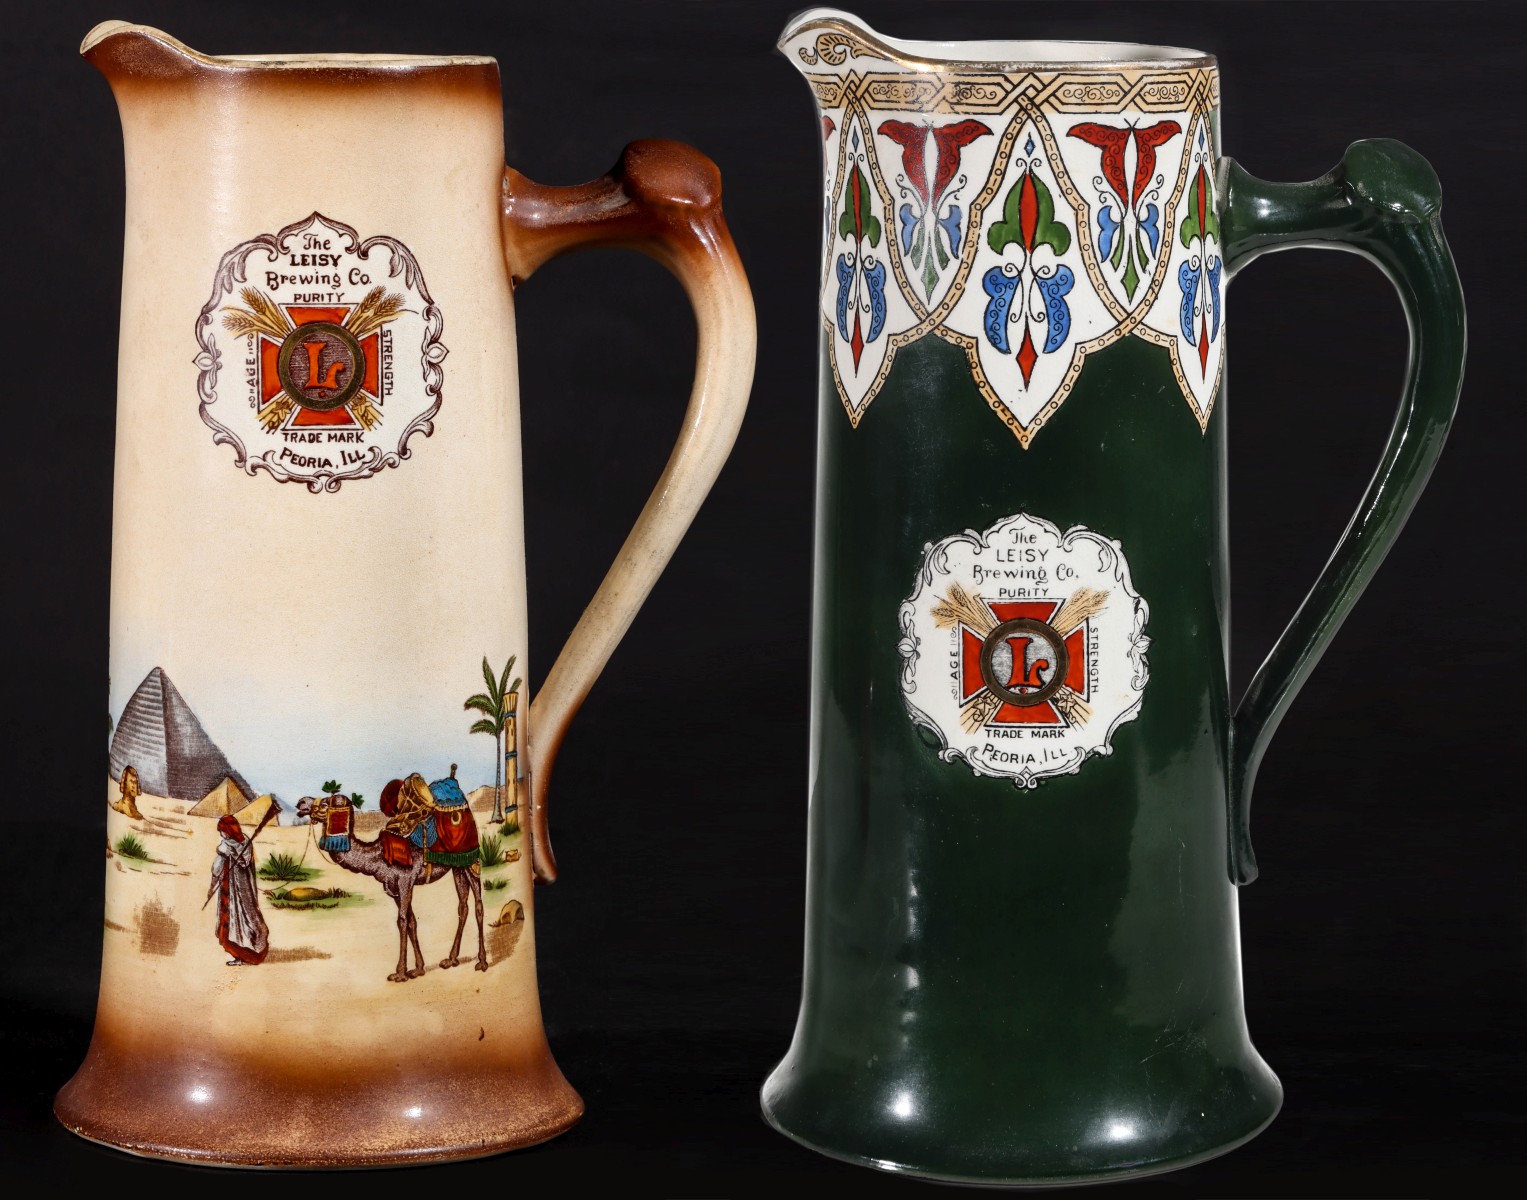 LEISY BREWING CO PRE-PROHIBITION ADVERTISING TANKARDS